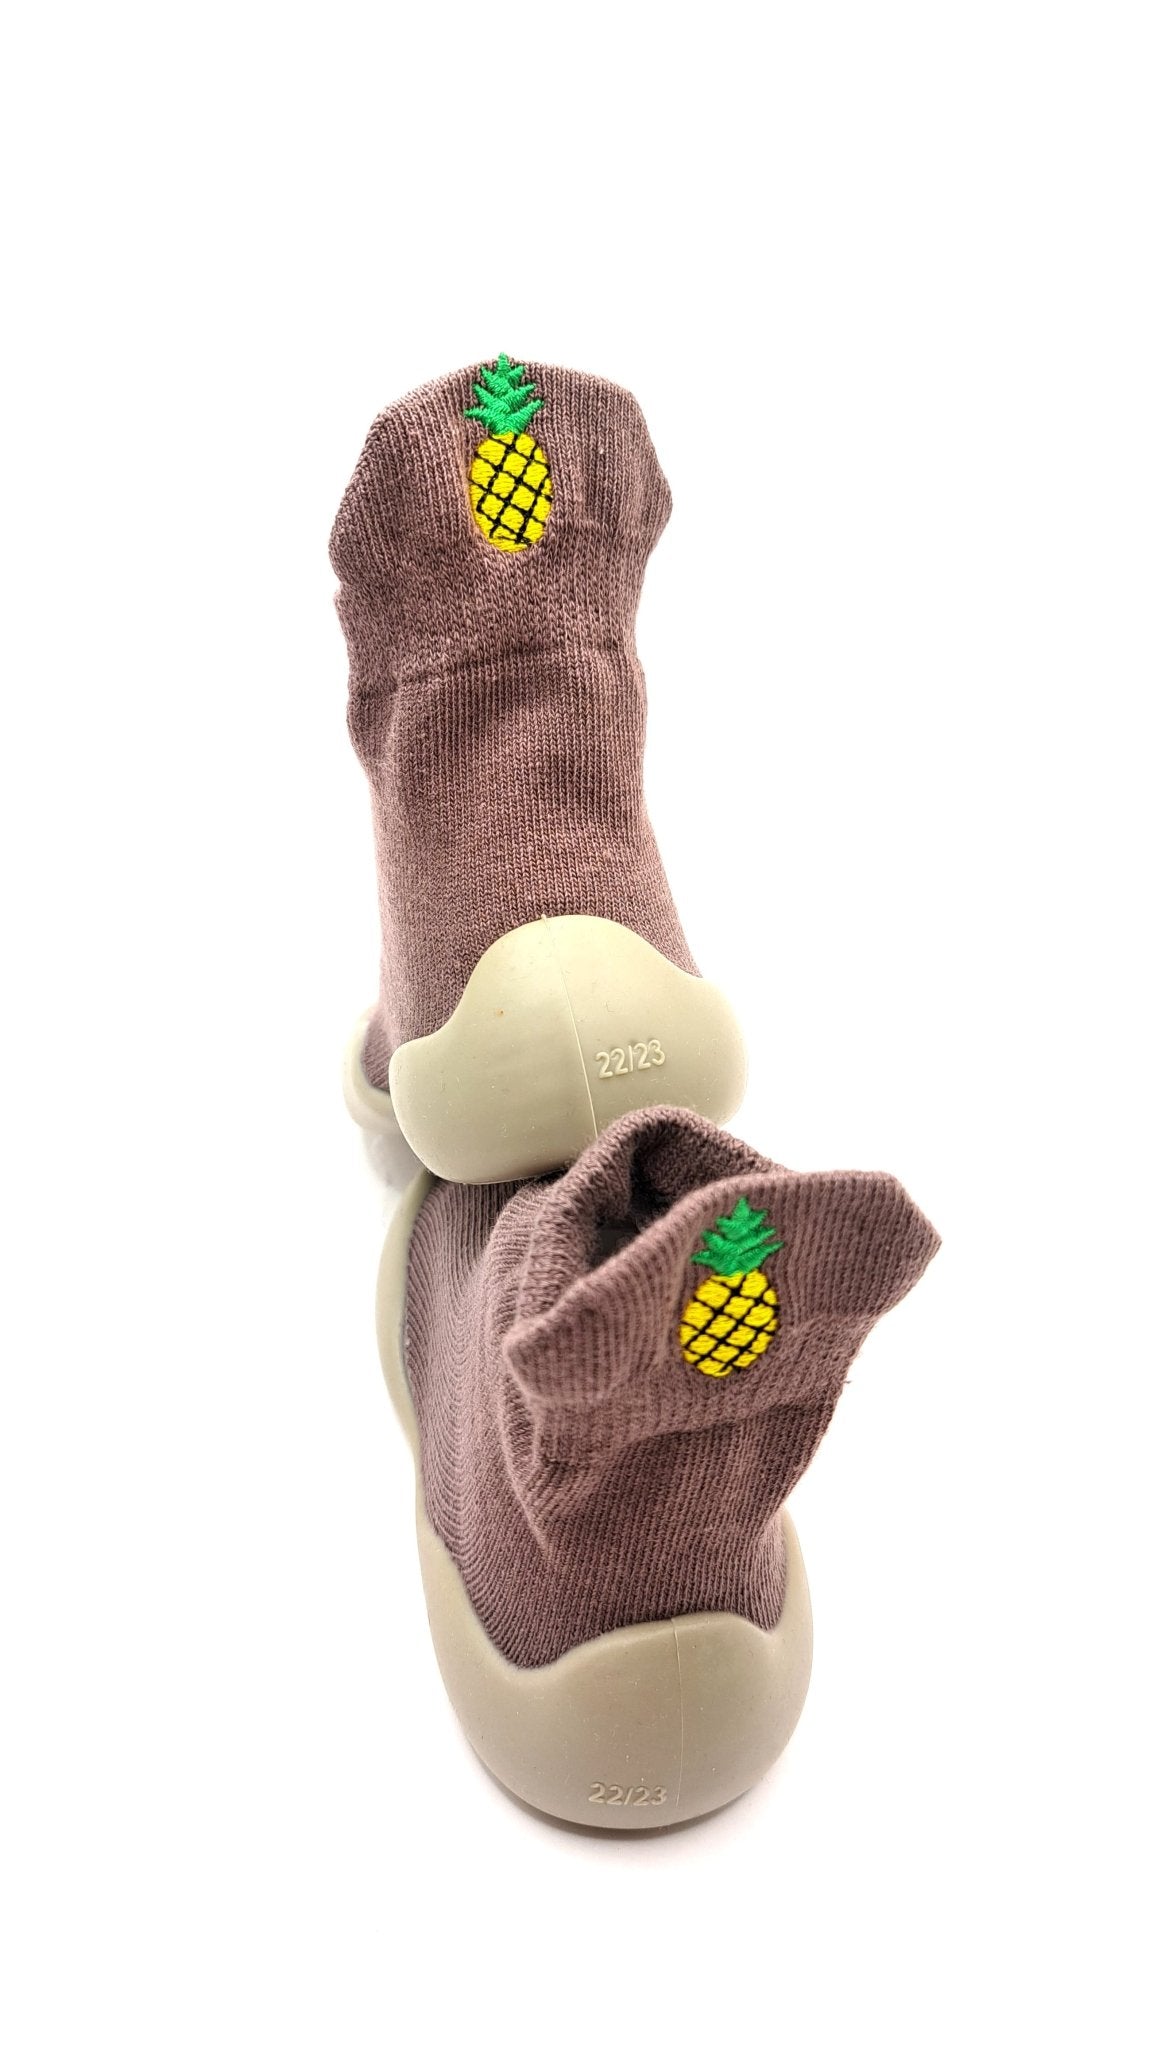 Fruit Drop by Bearba- Sock Shoes for Babies & Toddlers Sizes-XS,S,M,L,XL Non Slip Soles, Machine Washable-3 colours - Bearba